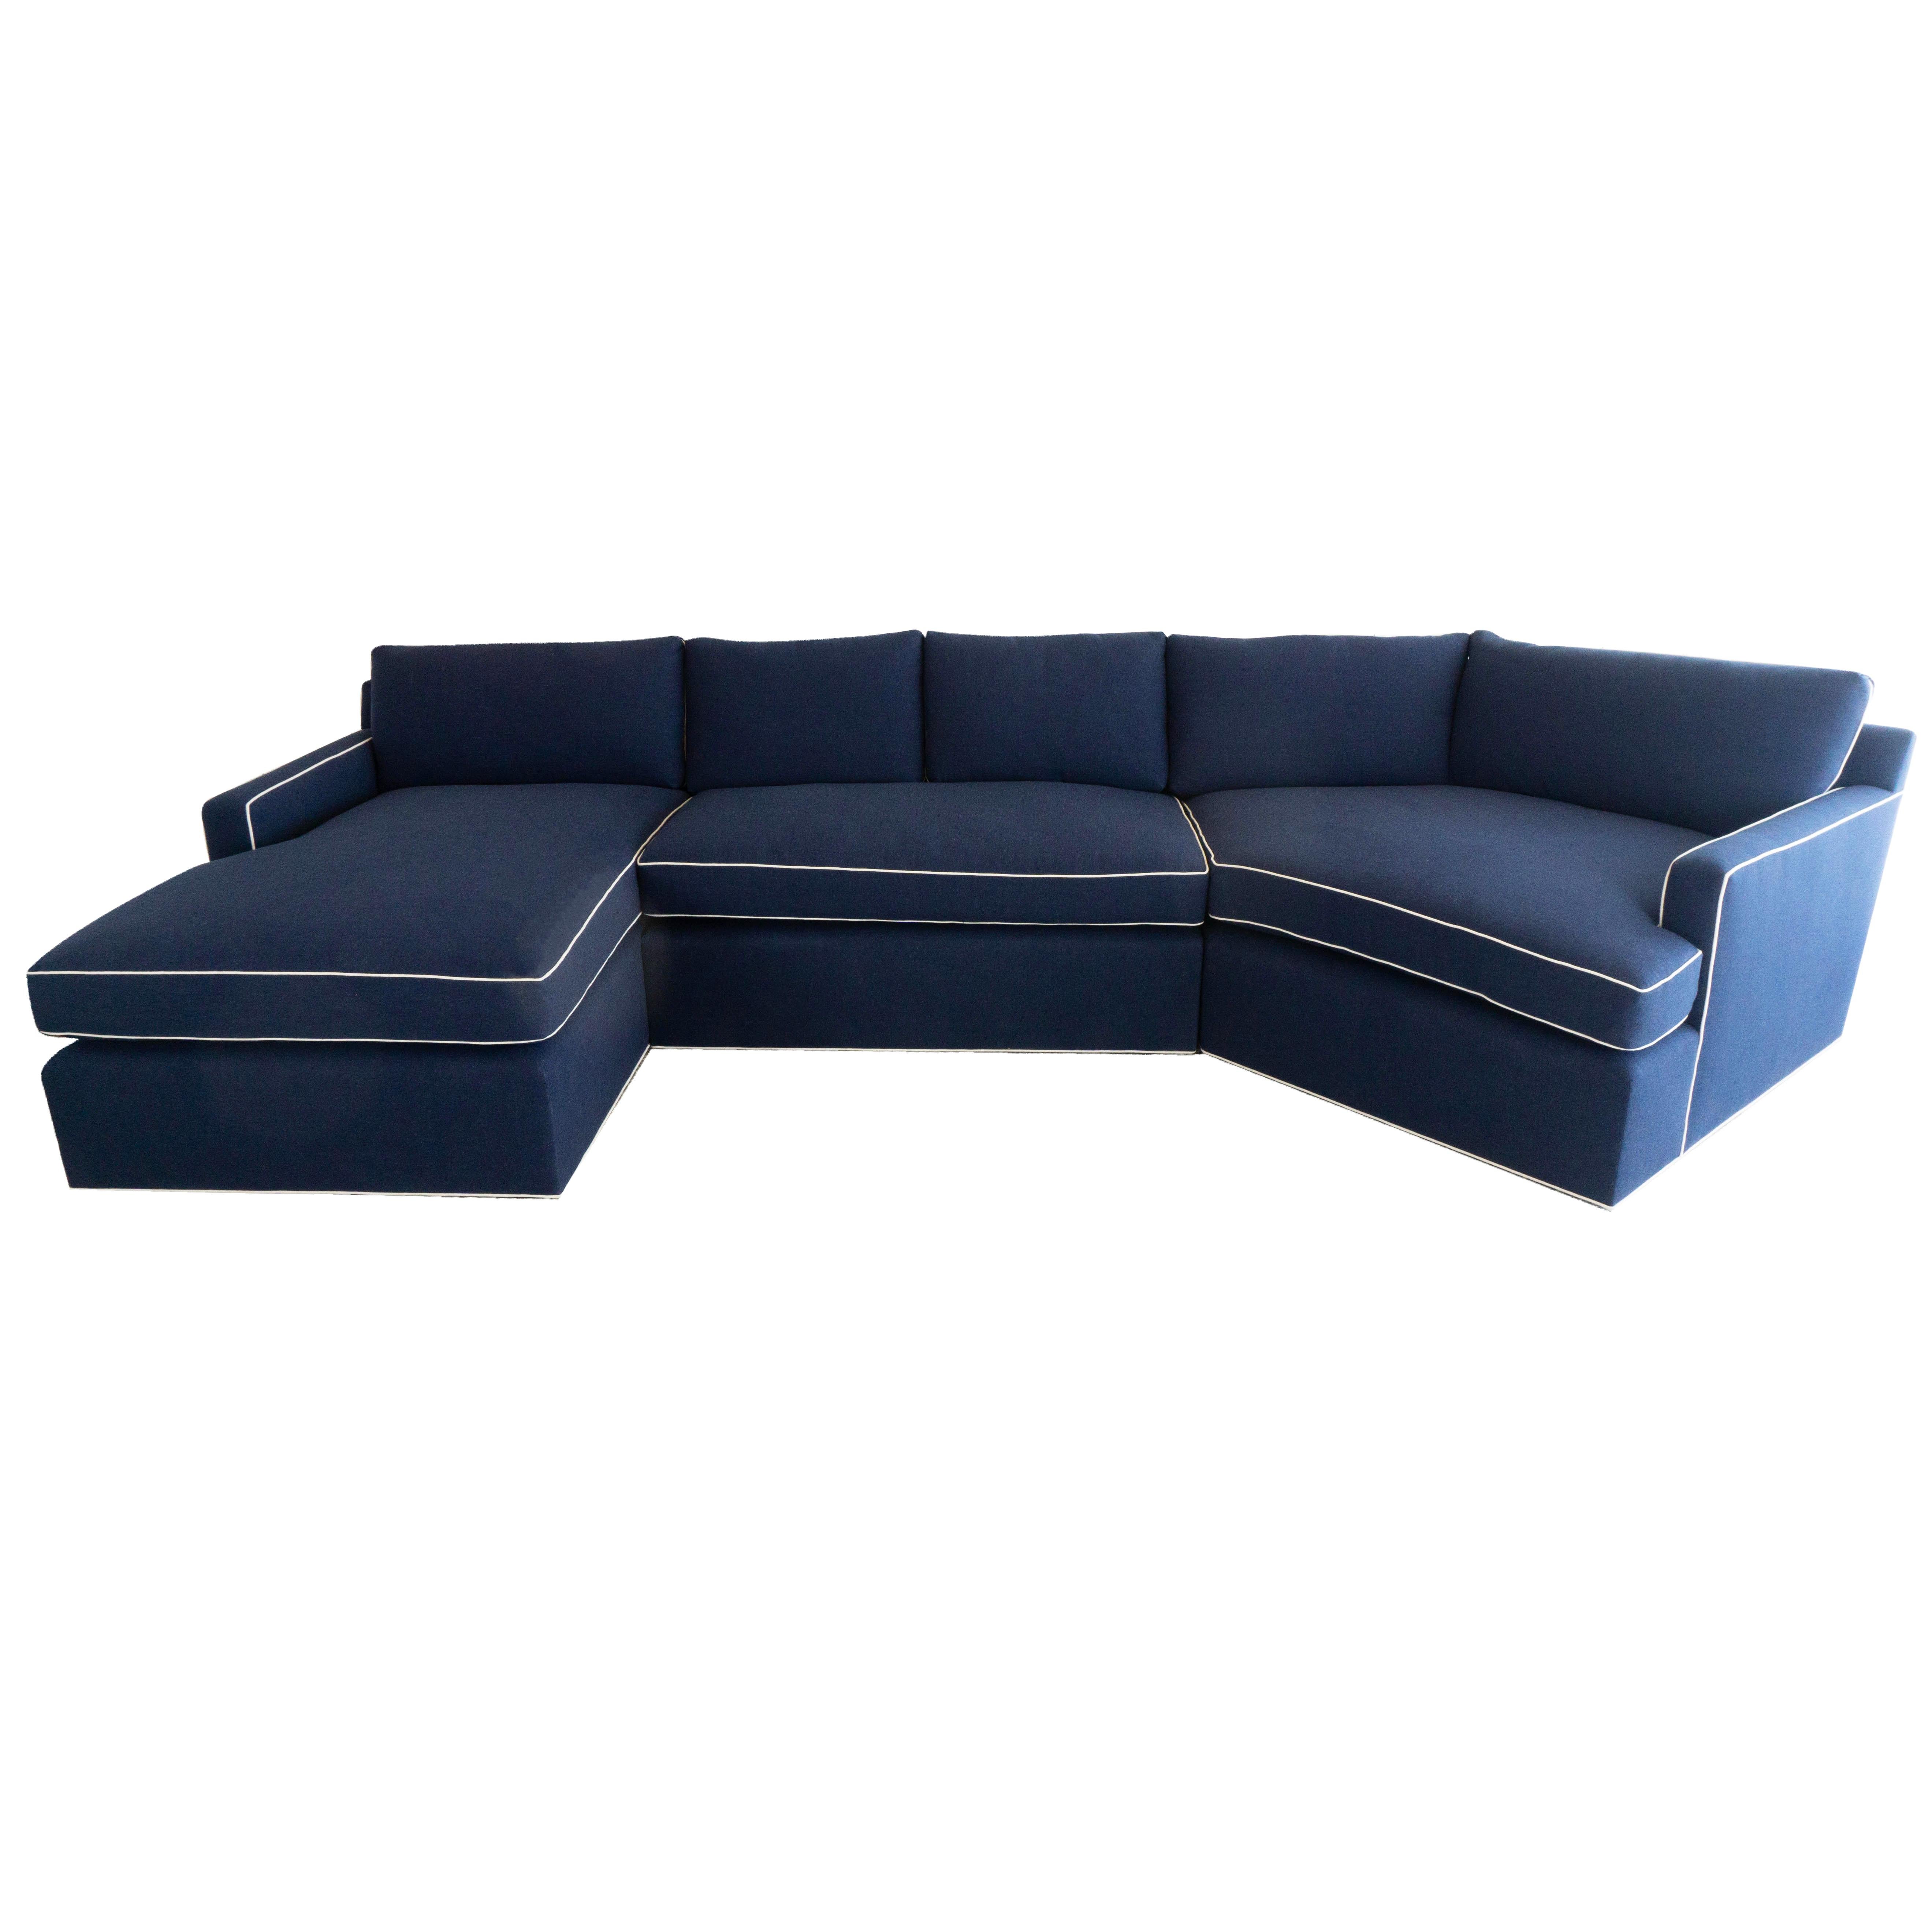 Large Custom Sectional Sofa with Chaise Lounge For Sale at 1stDibs | chaise  lounge sofa, chaise lounge sectional, custom sectional sofas